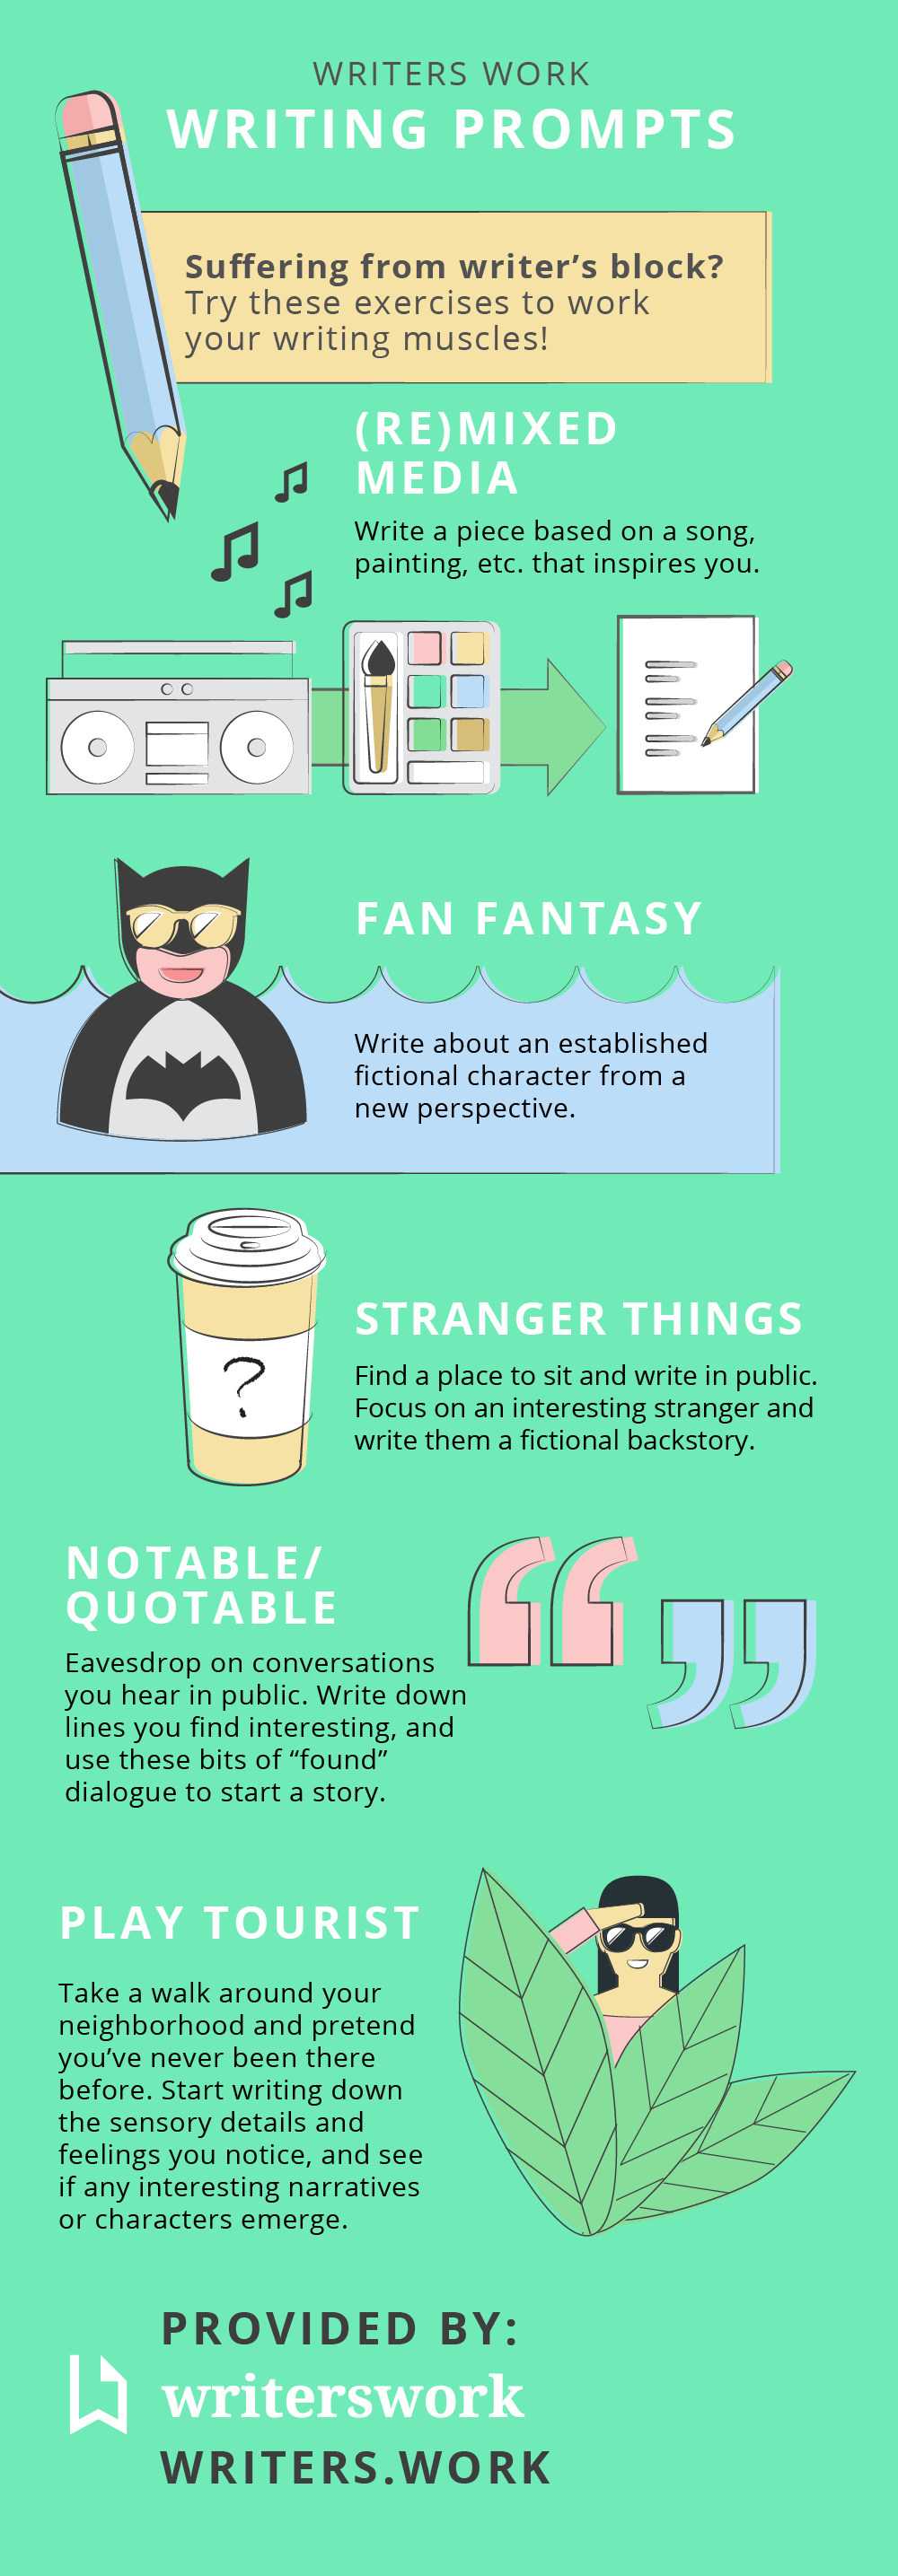 Infographic showing various writing prompt ideas.